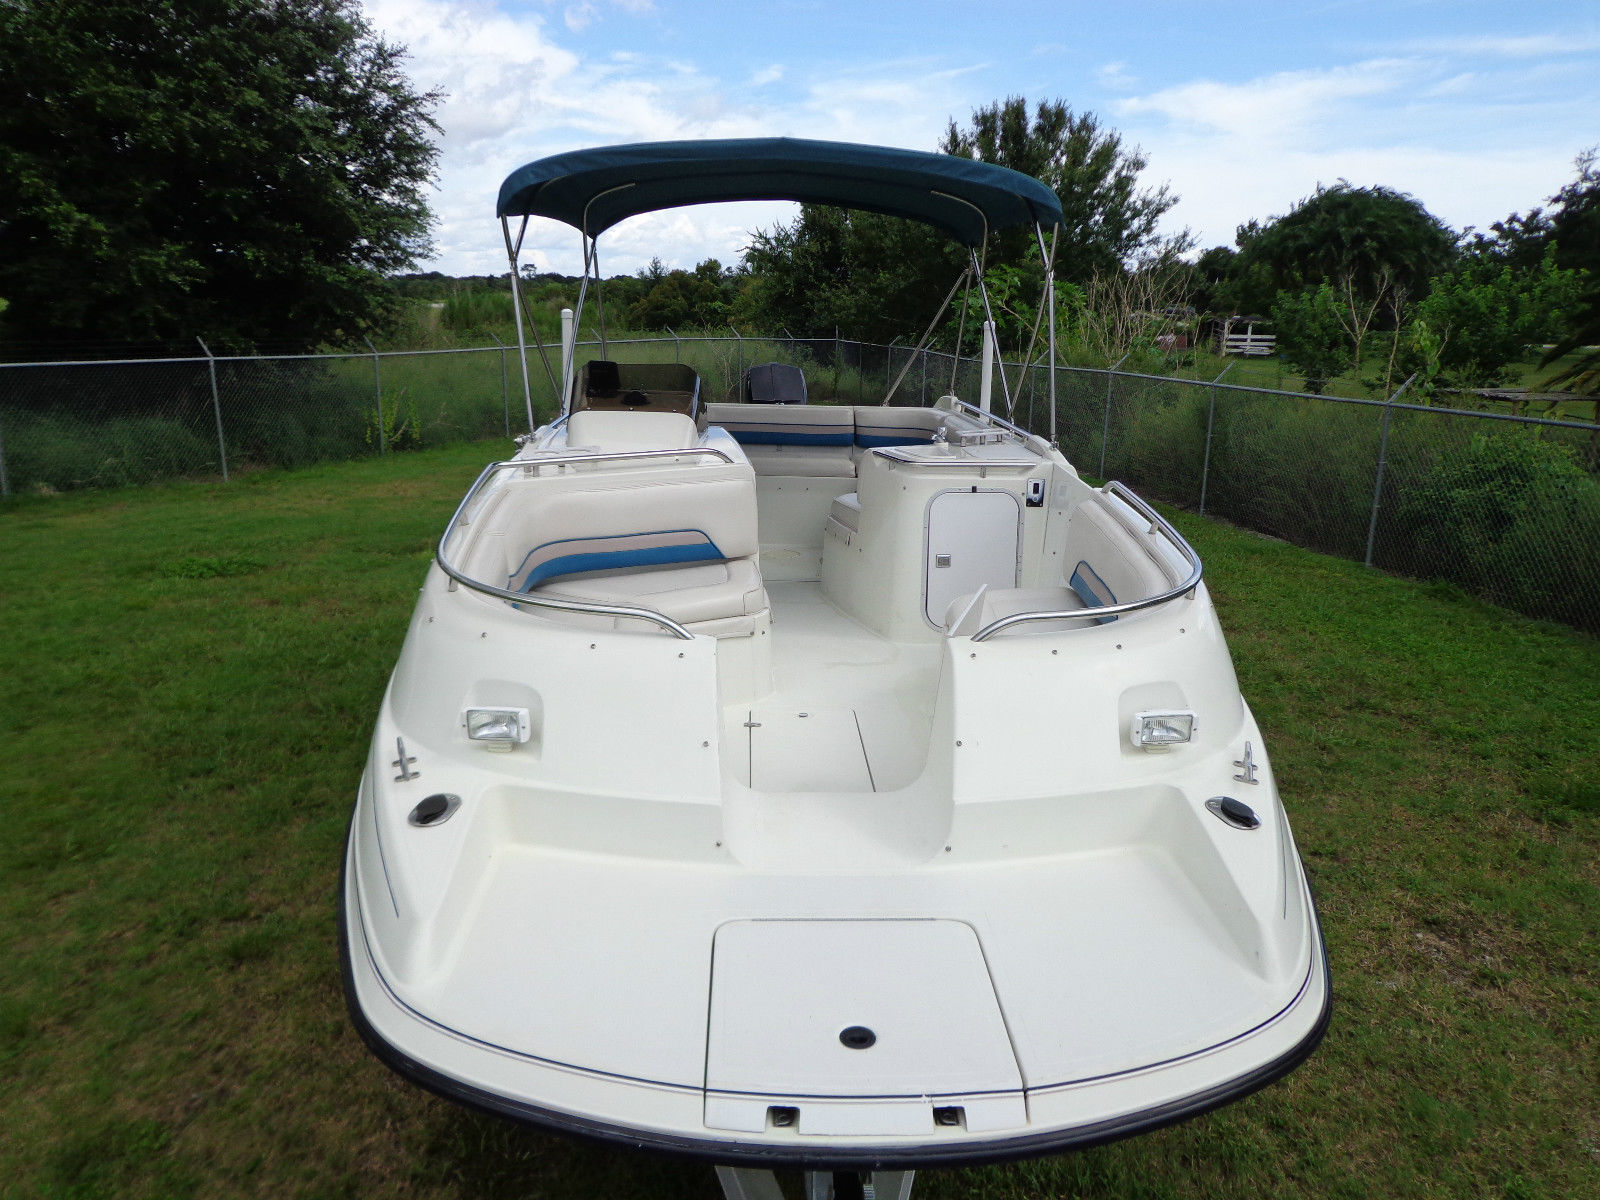 Chaparral Sunesta 220 1995 for sale for $1 - Boats-from ...